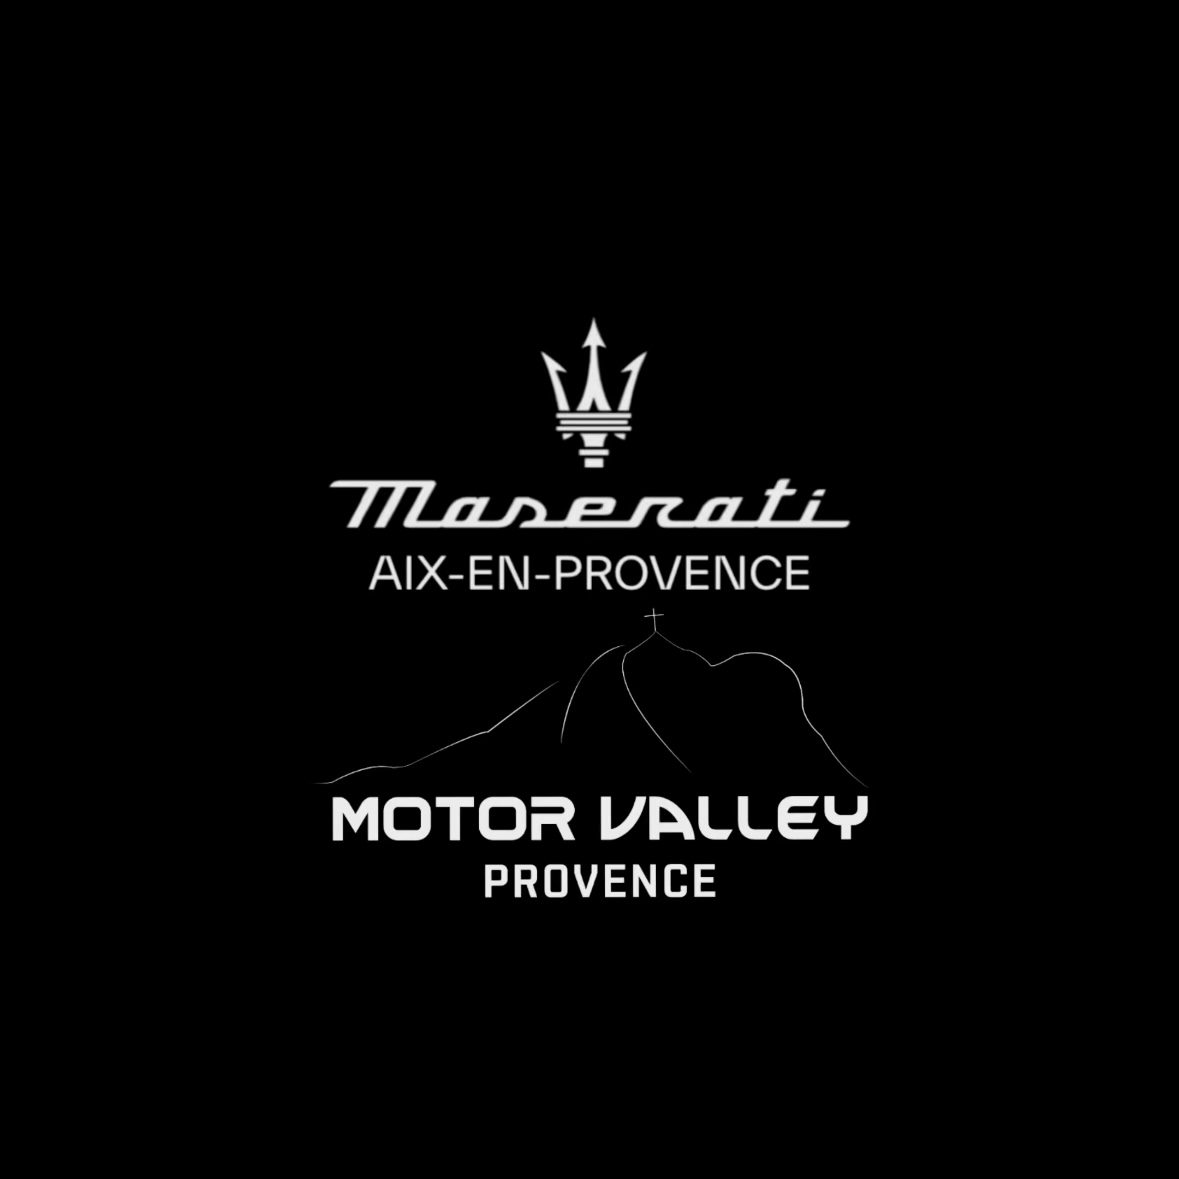 MOTOR VALLEY PROVENCE